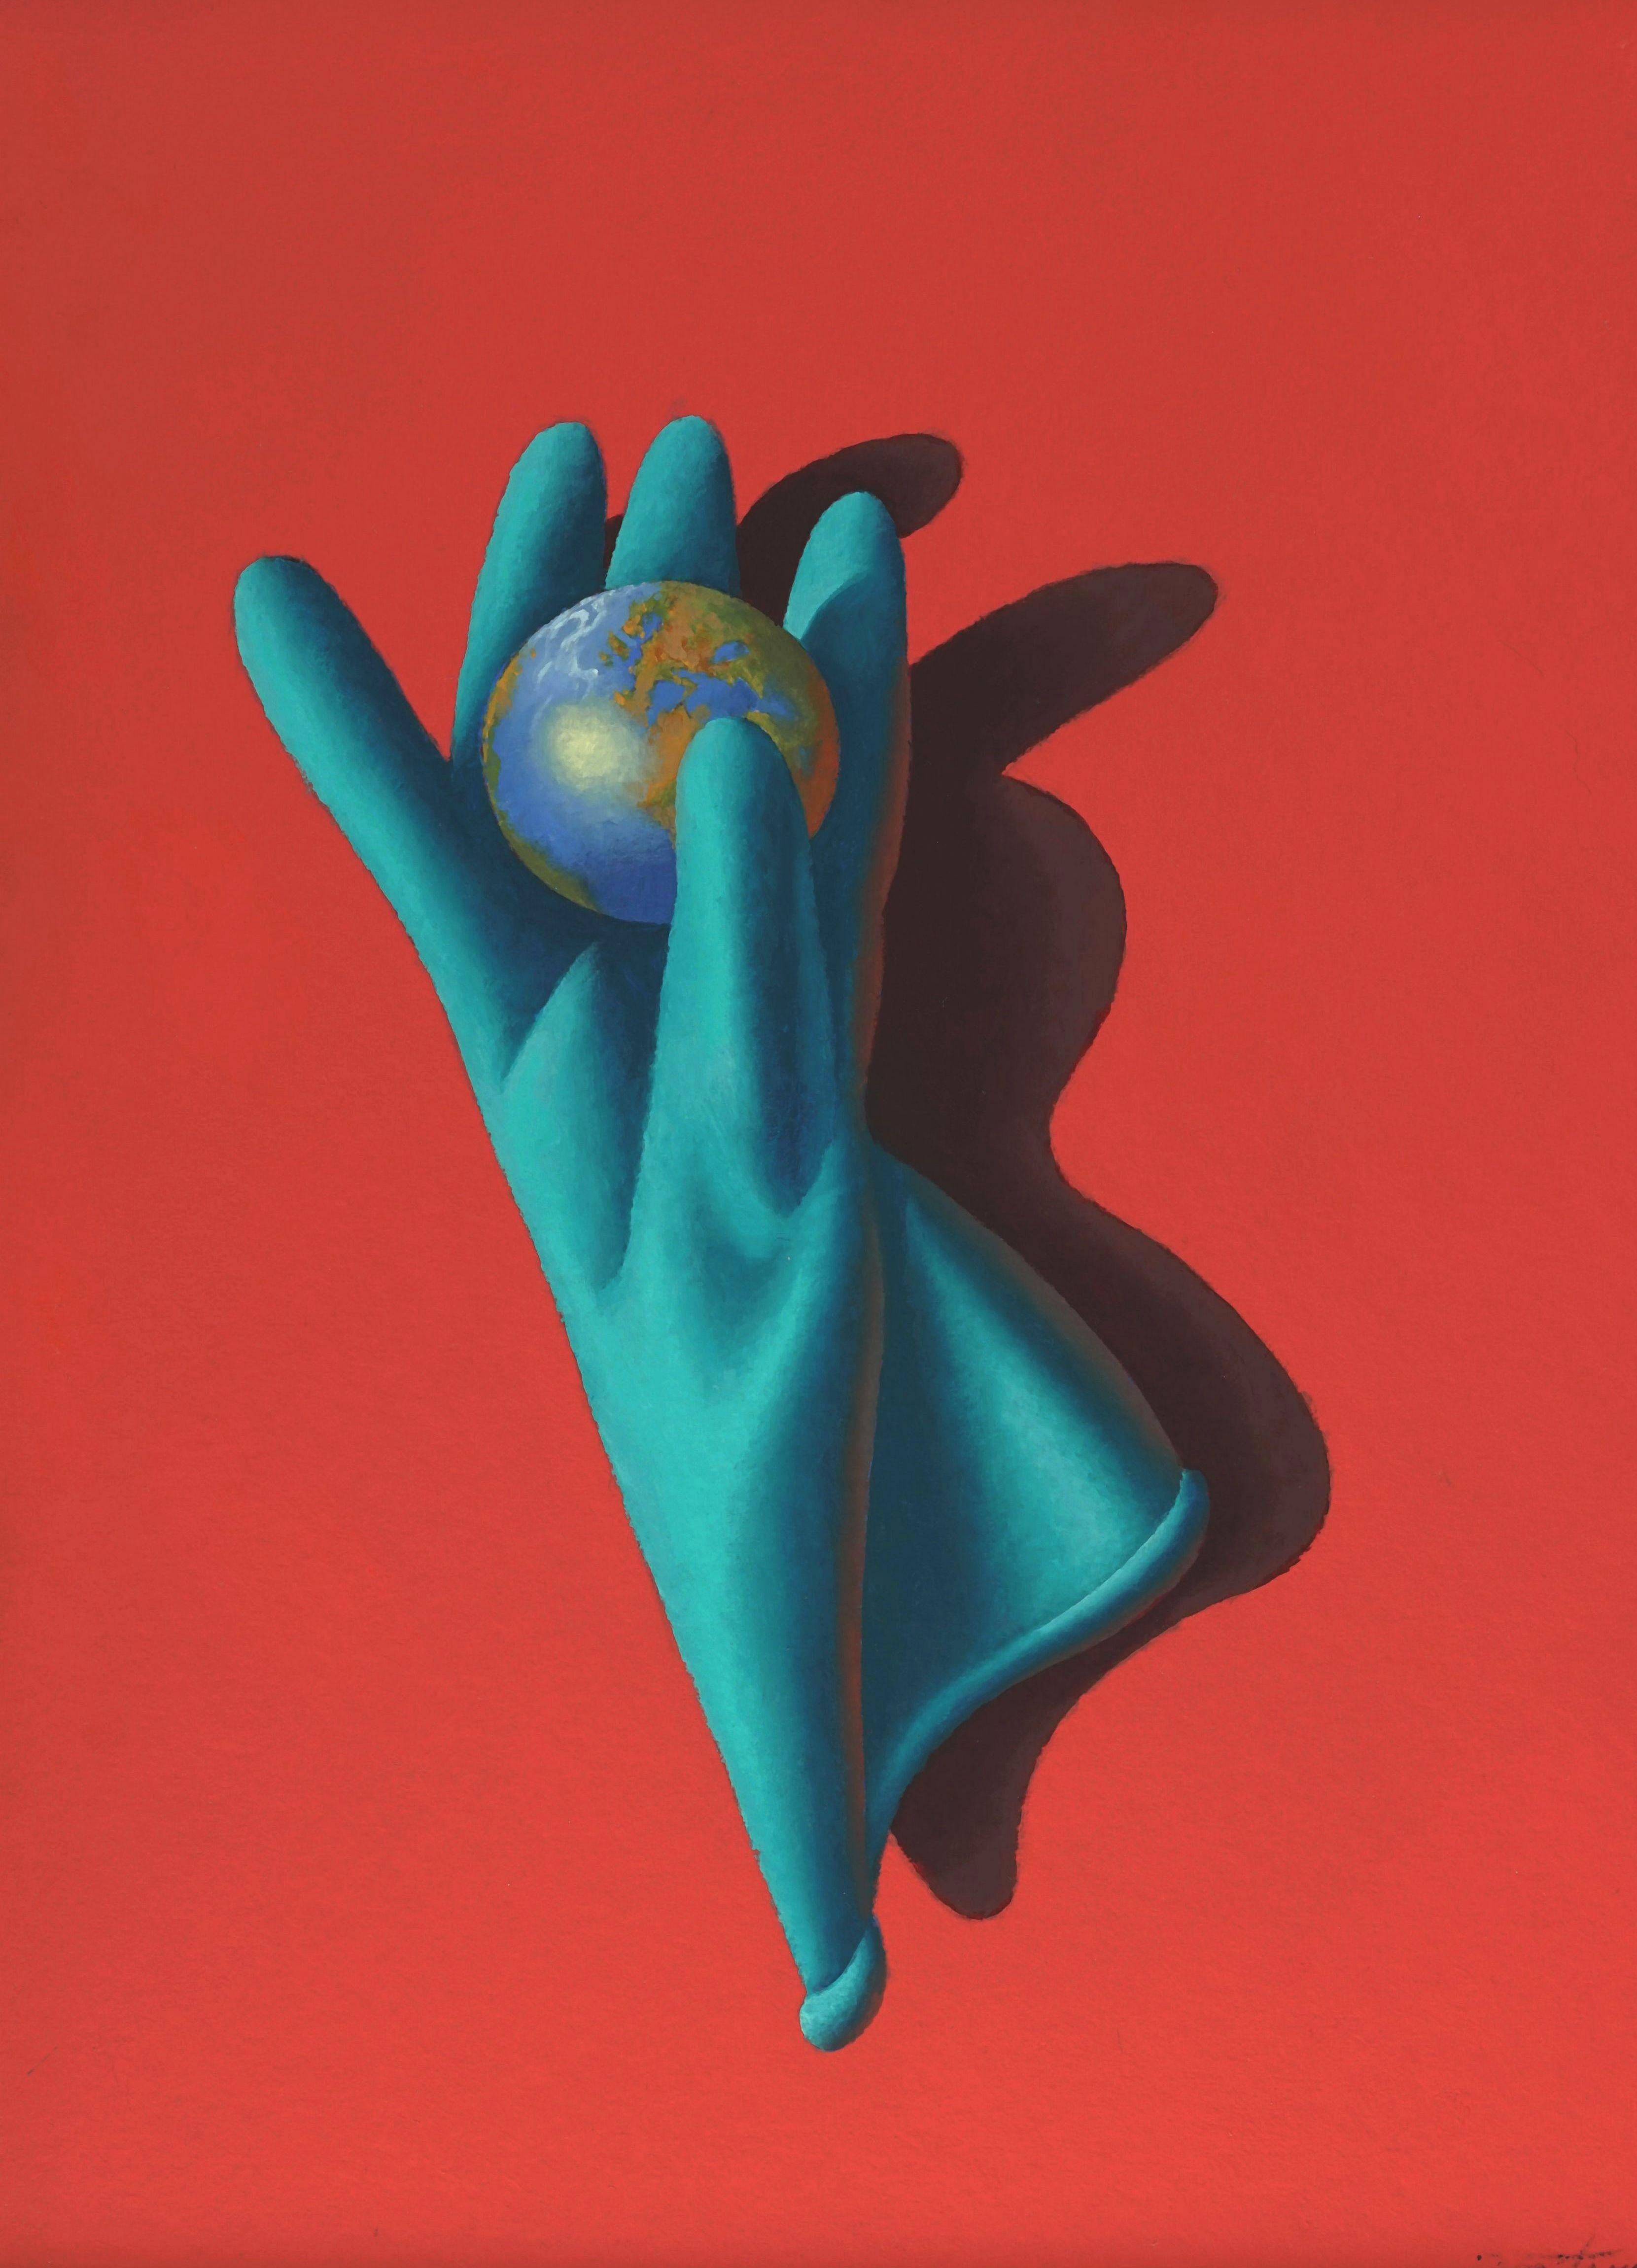 Gentle hands that rule the world. 2020. Canvas, cardboard, oil, 60x42 cm - Painting by Juris Dimiters